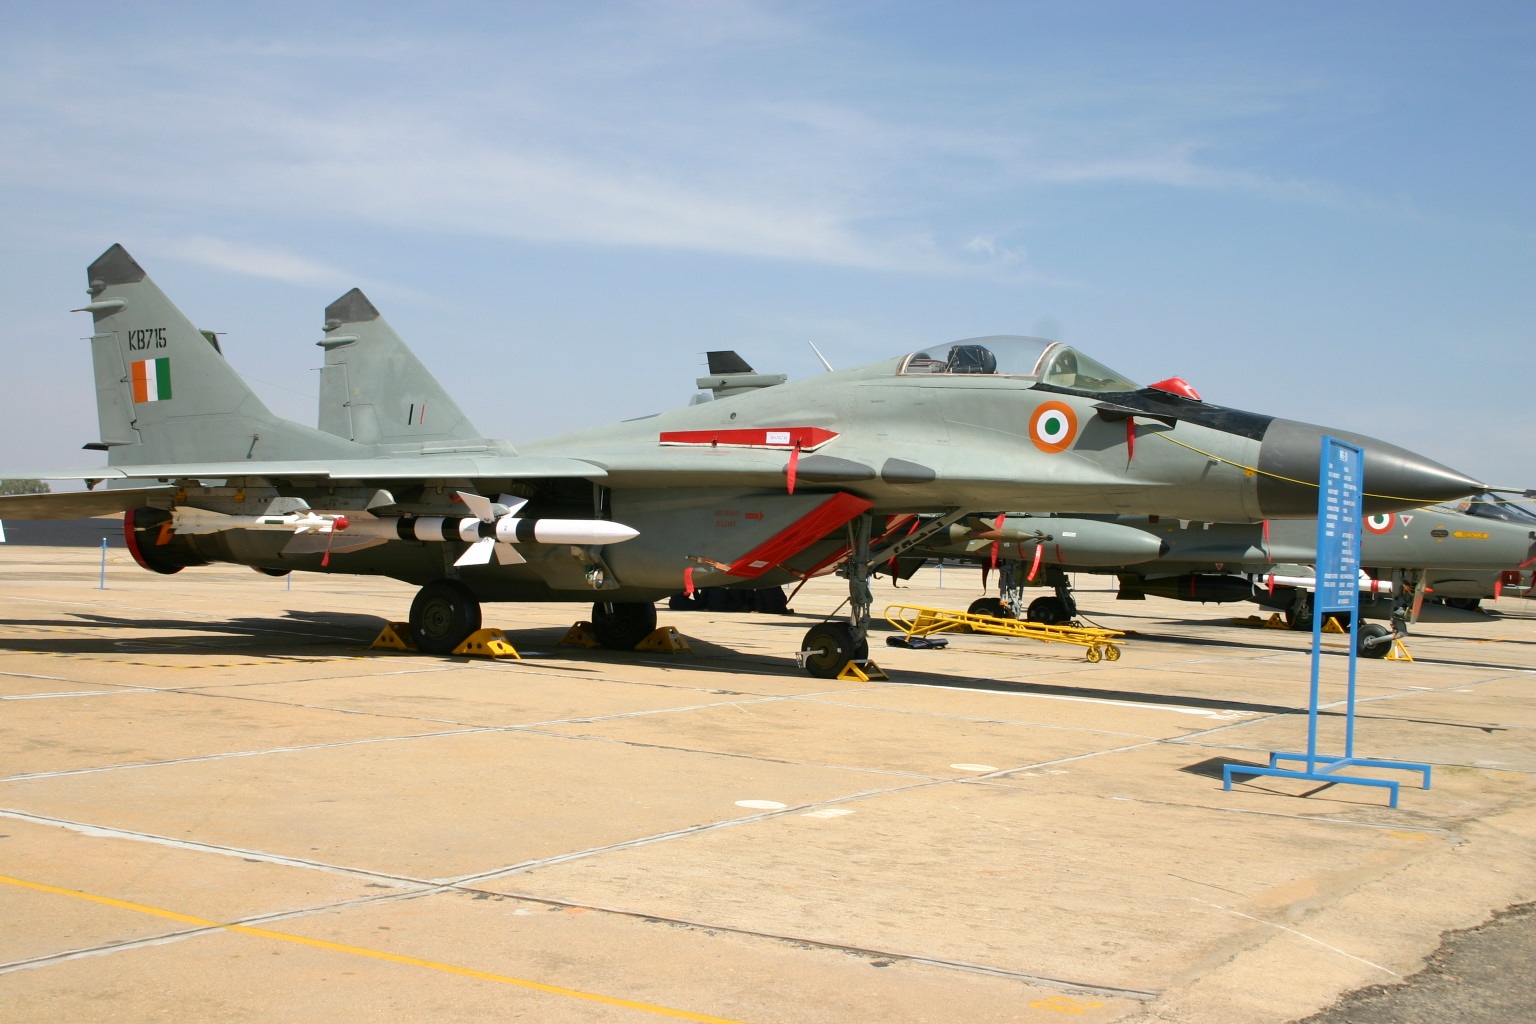 MiG-29 aircraft of the Indian Air Force